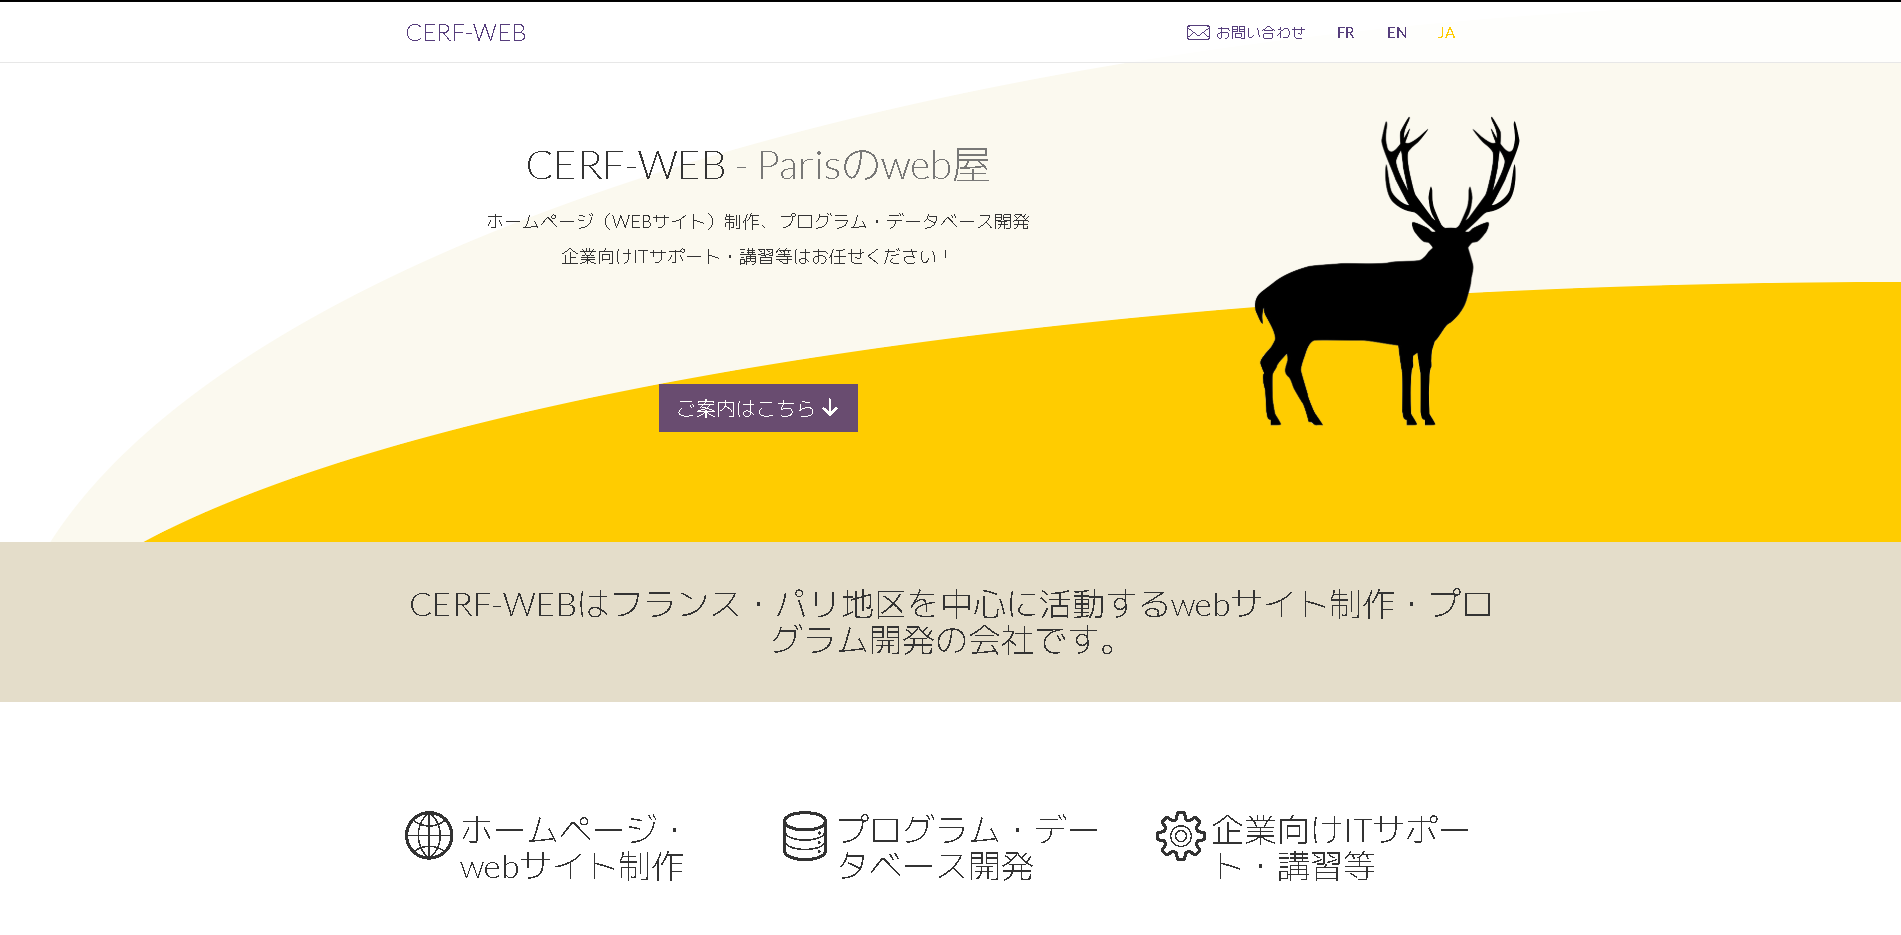 CERF-WEB S.A.SのCERF-WEB S.A.Sサービス